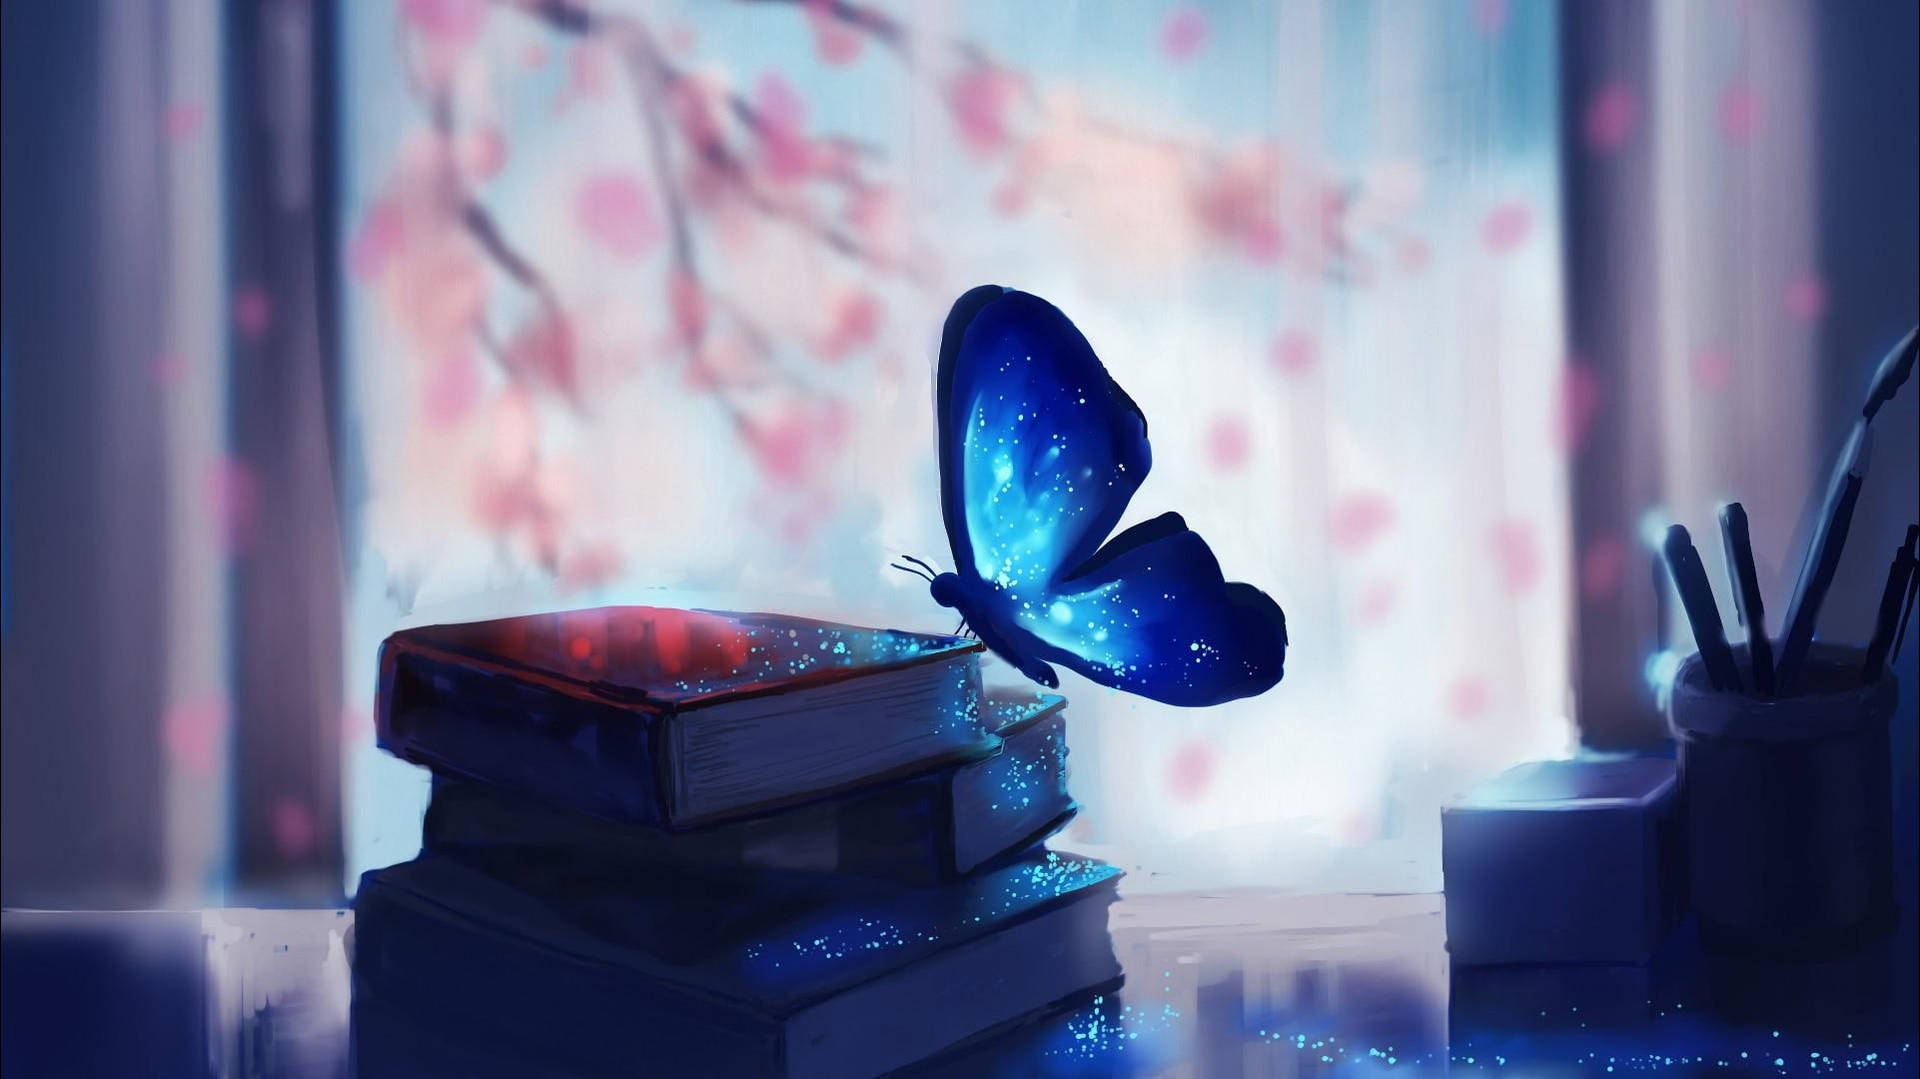 Dreamy Books And Butterfly Background